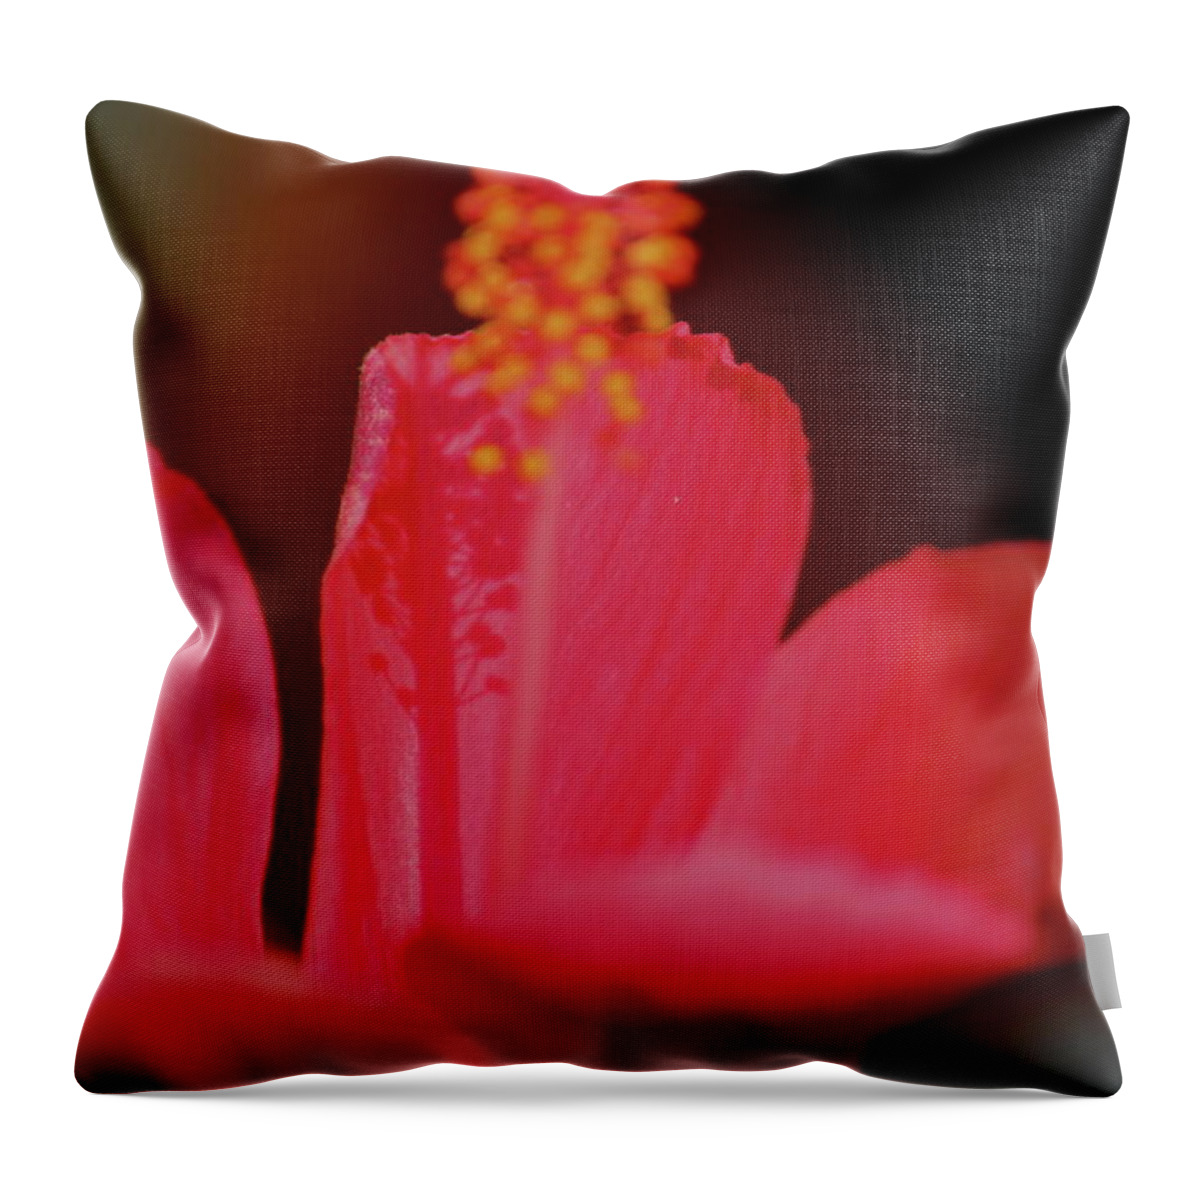 Hibiscus Throw Pillow featuring the photograph Hibiscus Shadows by Trent Mallett